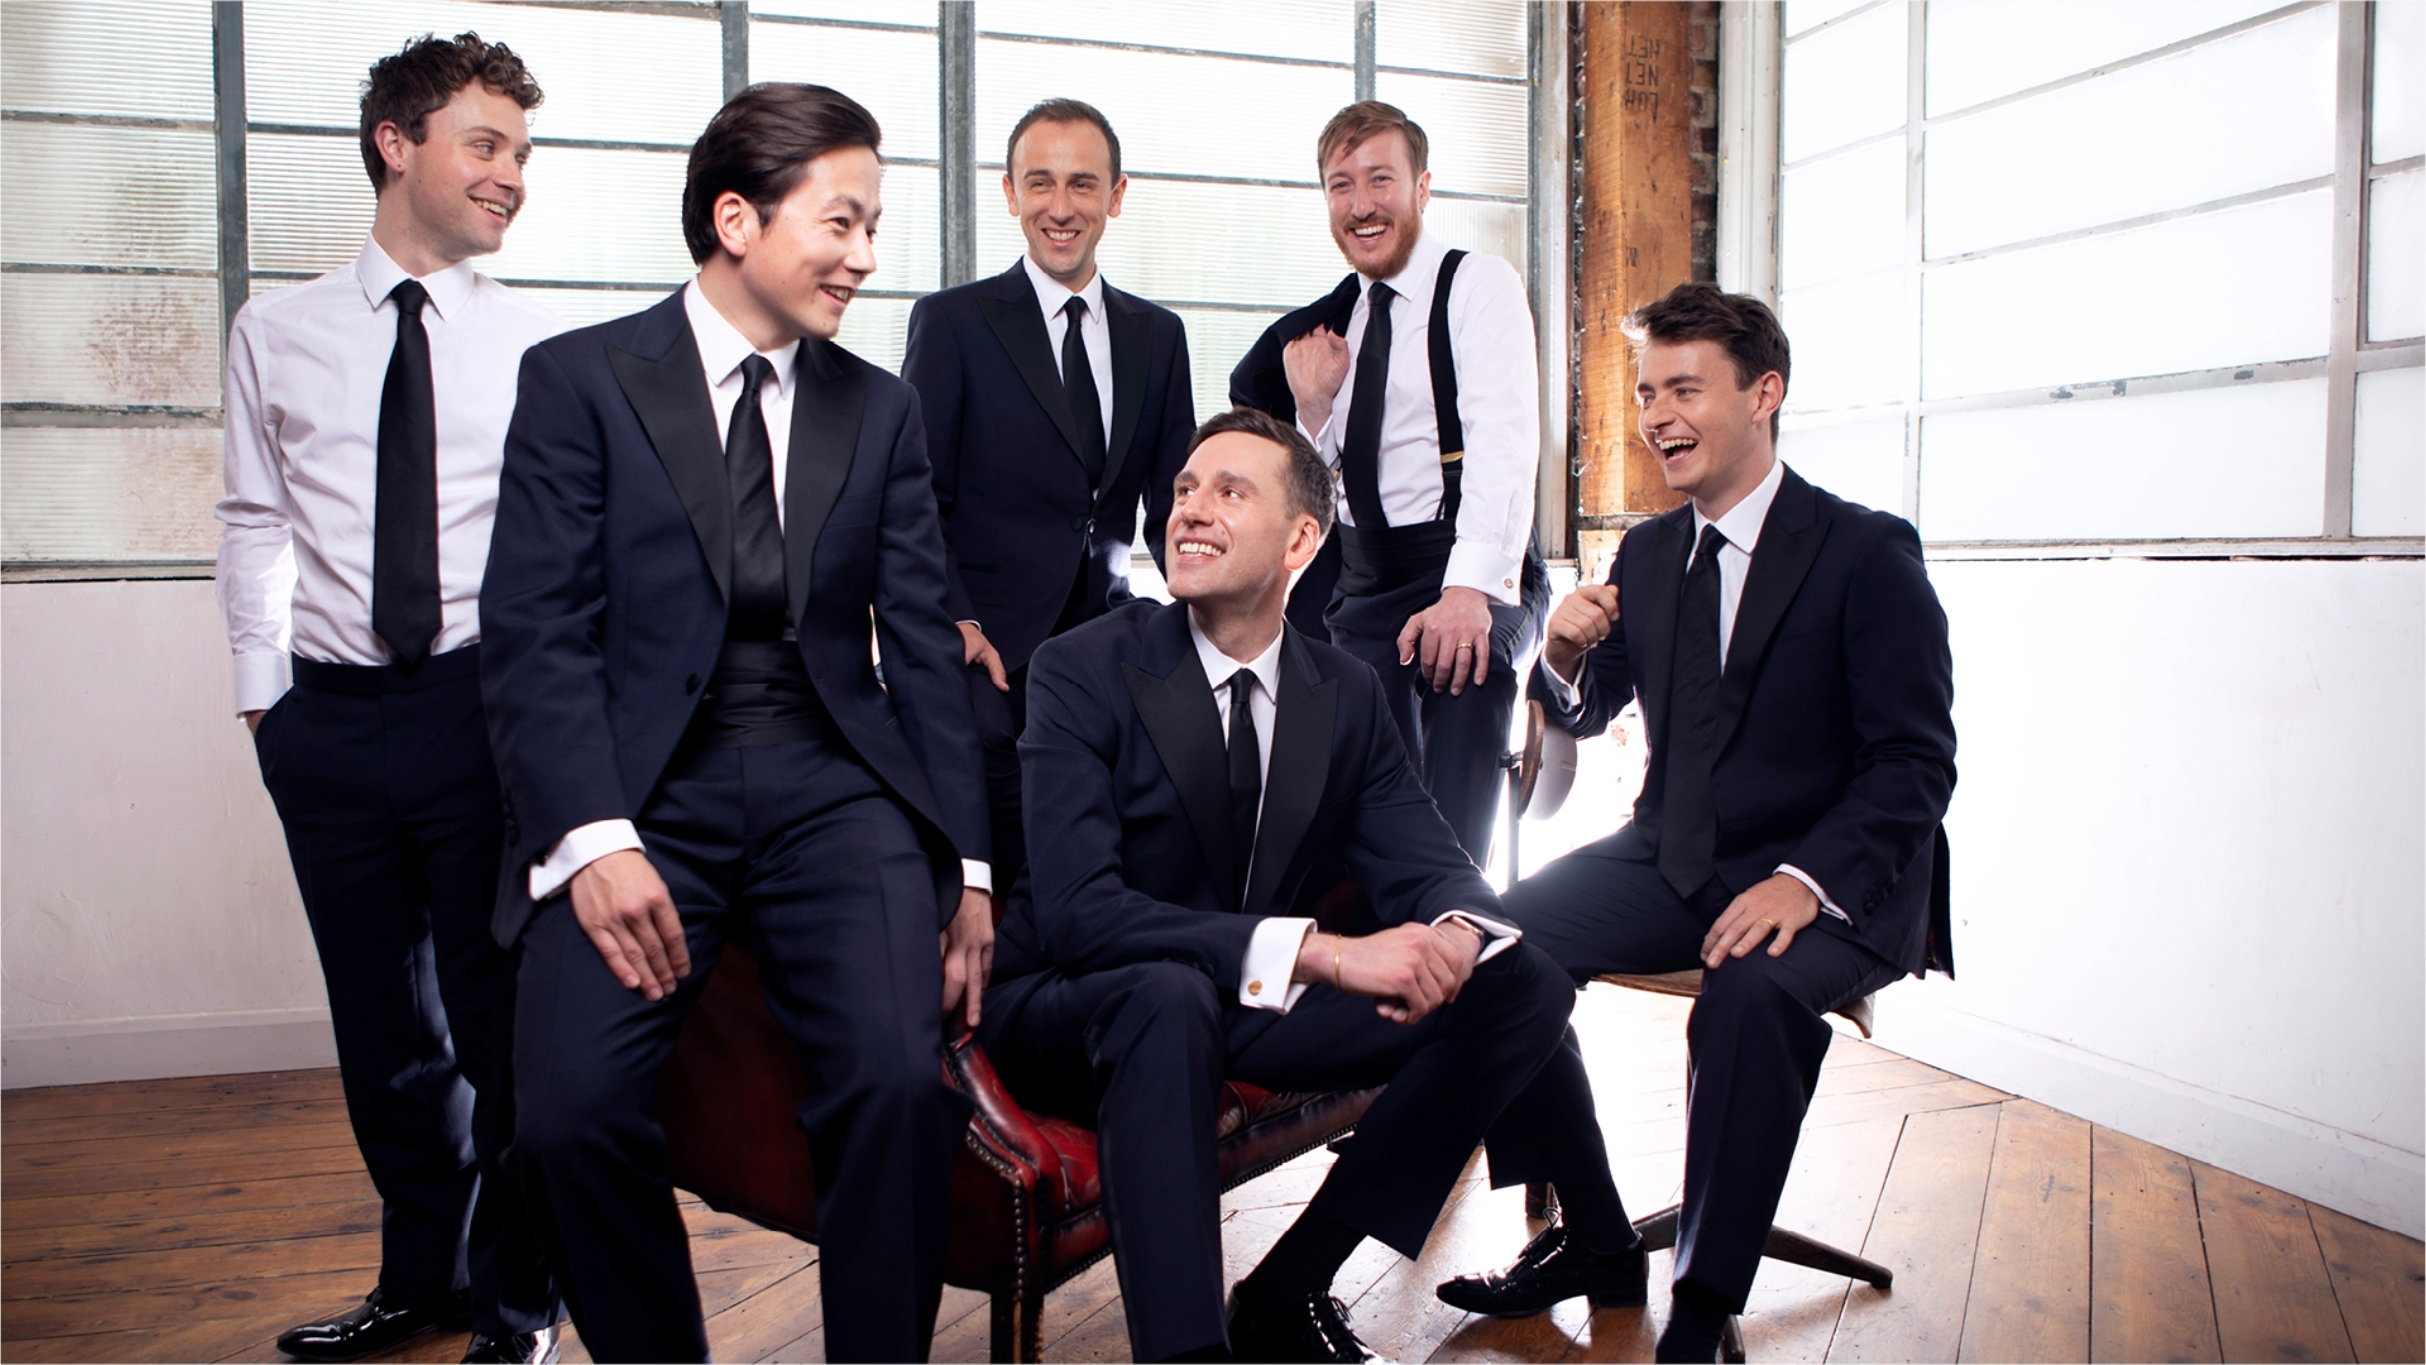 Image used with permission from Ticketmaster | Songbirds: The Kings Singers tickets